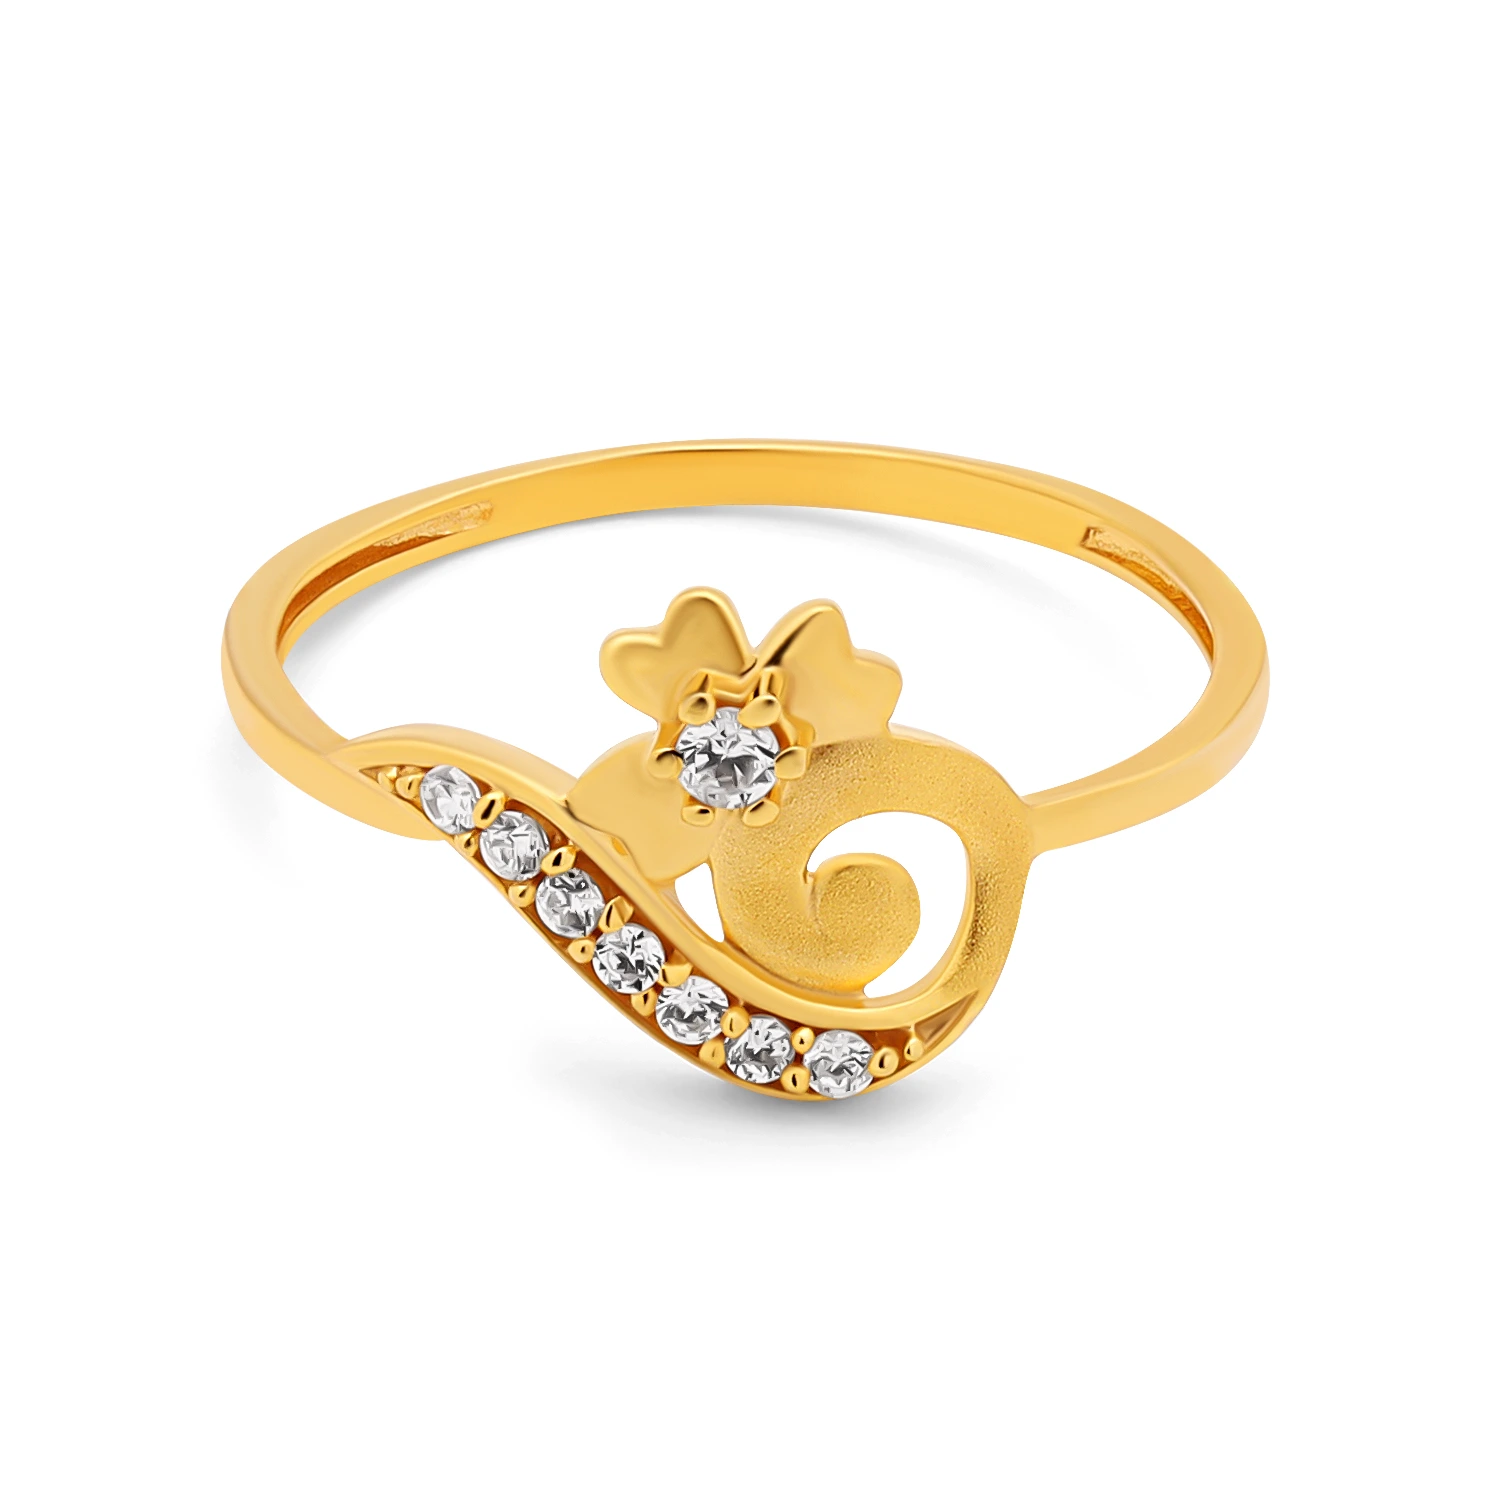 Buy quality Elegant Rose Gold Ring with Diamond Floral Accent in Pune